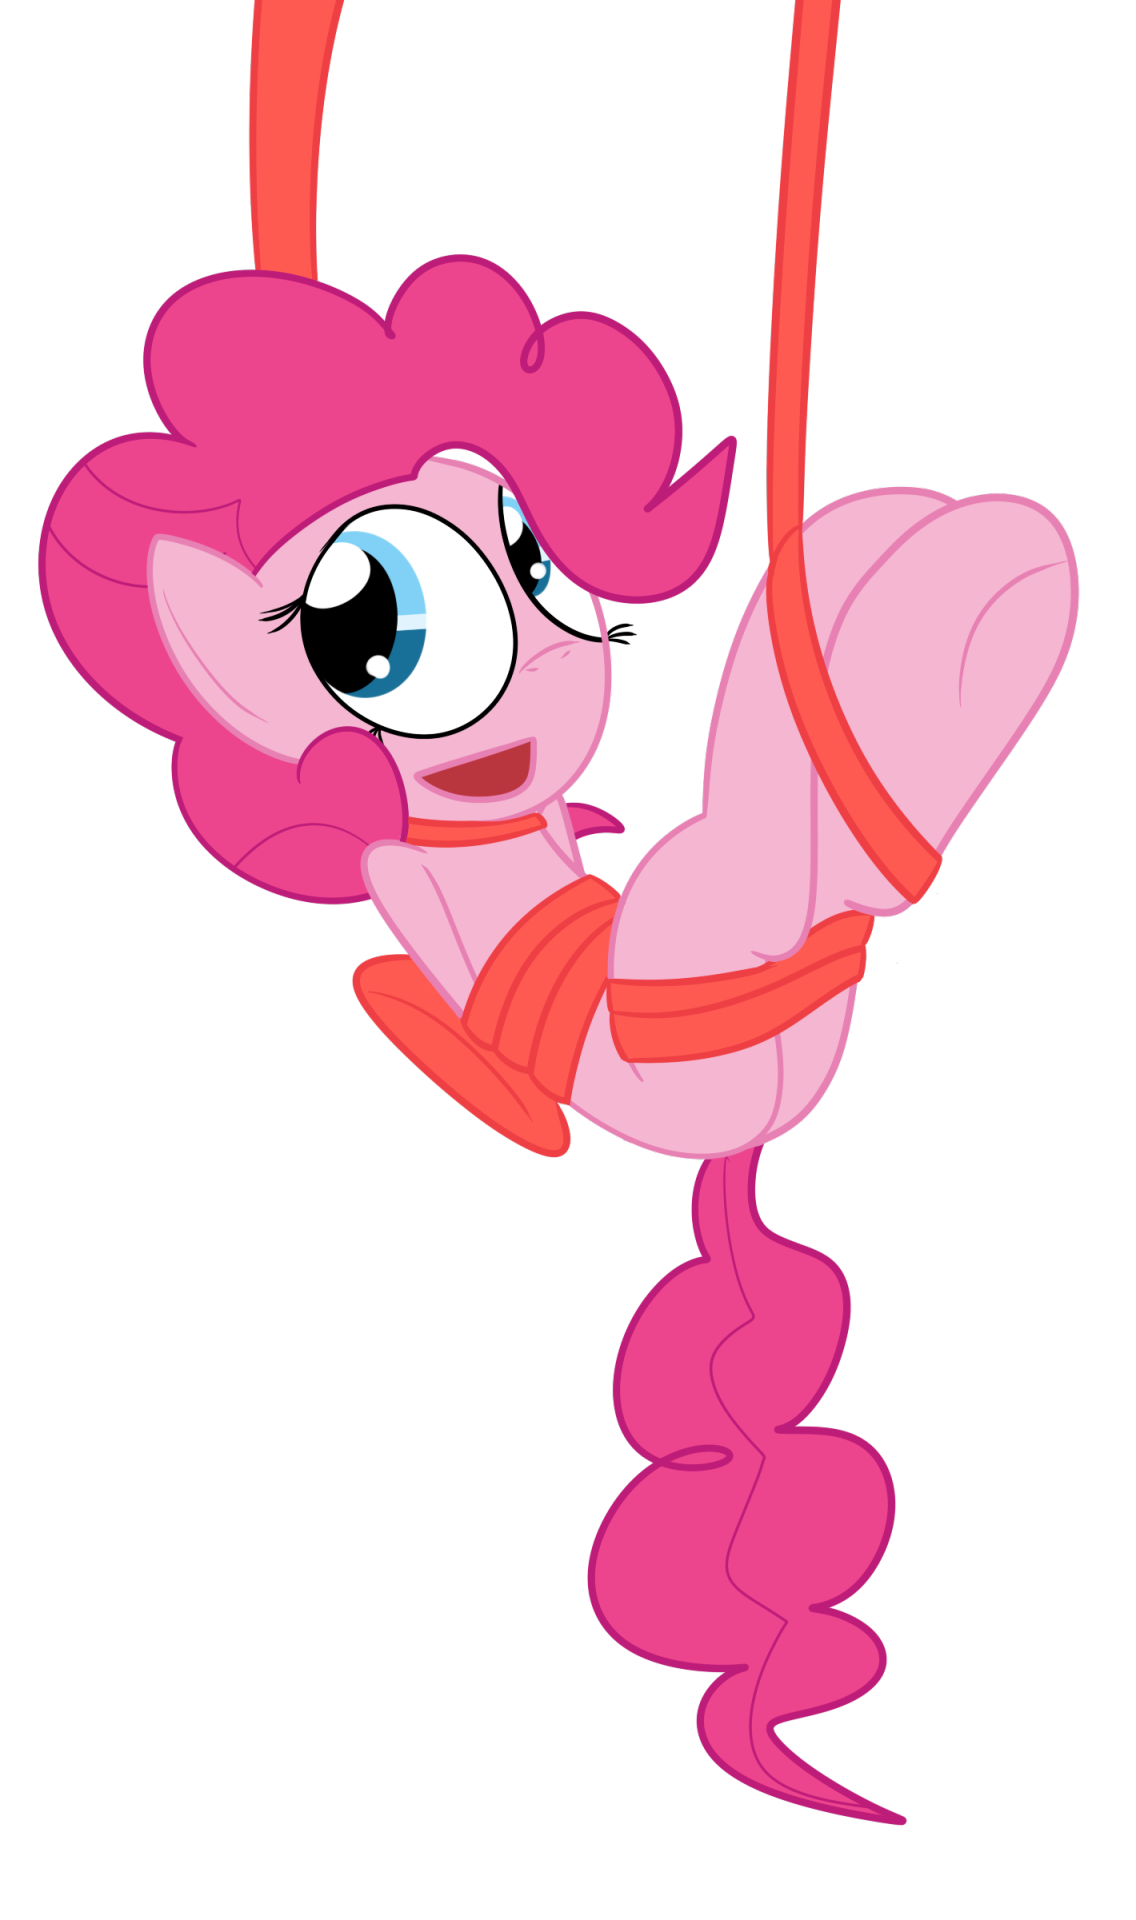 mrdegradation:On the sixth day of ponies, I give to Mang-Dev a Pinkie Pie! I give